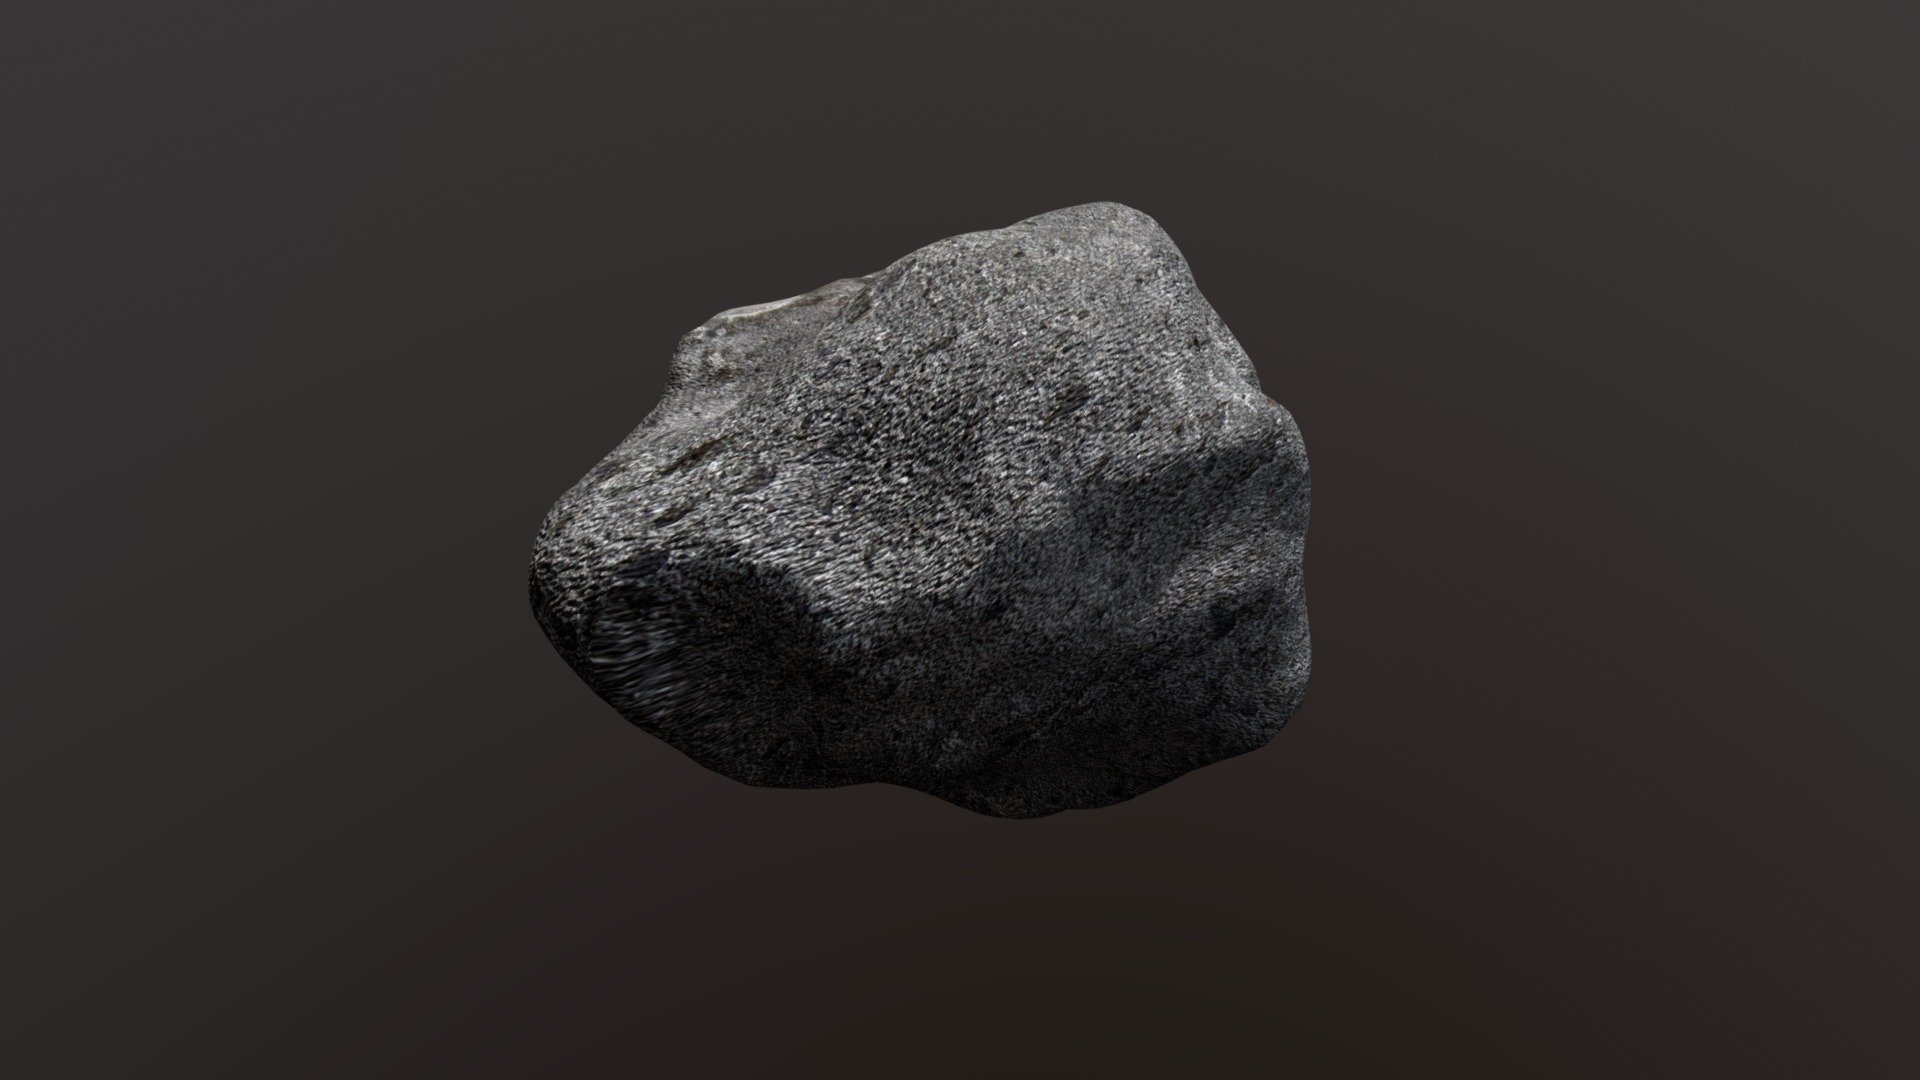 This is a stone 3d model